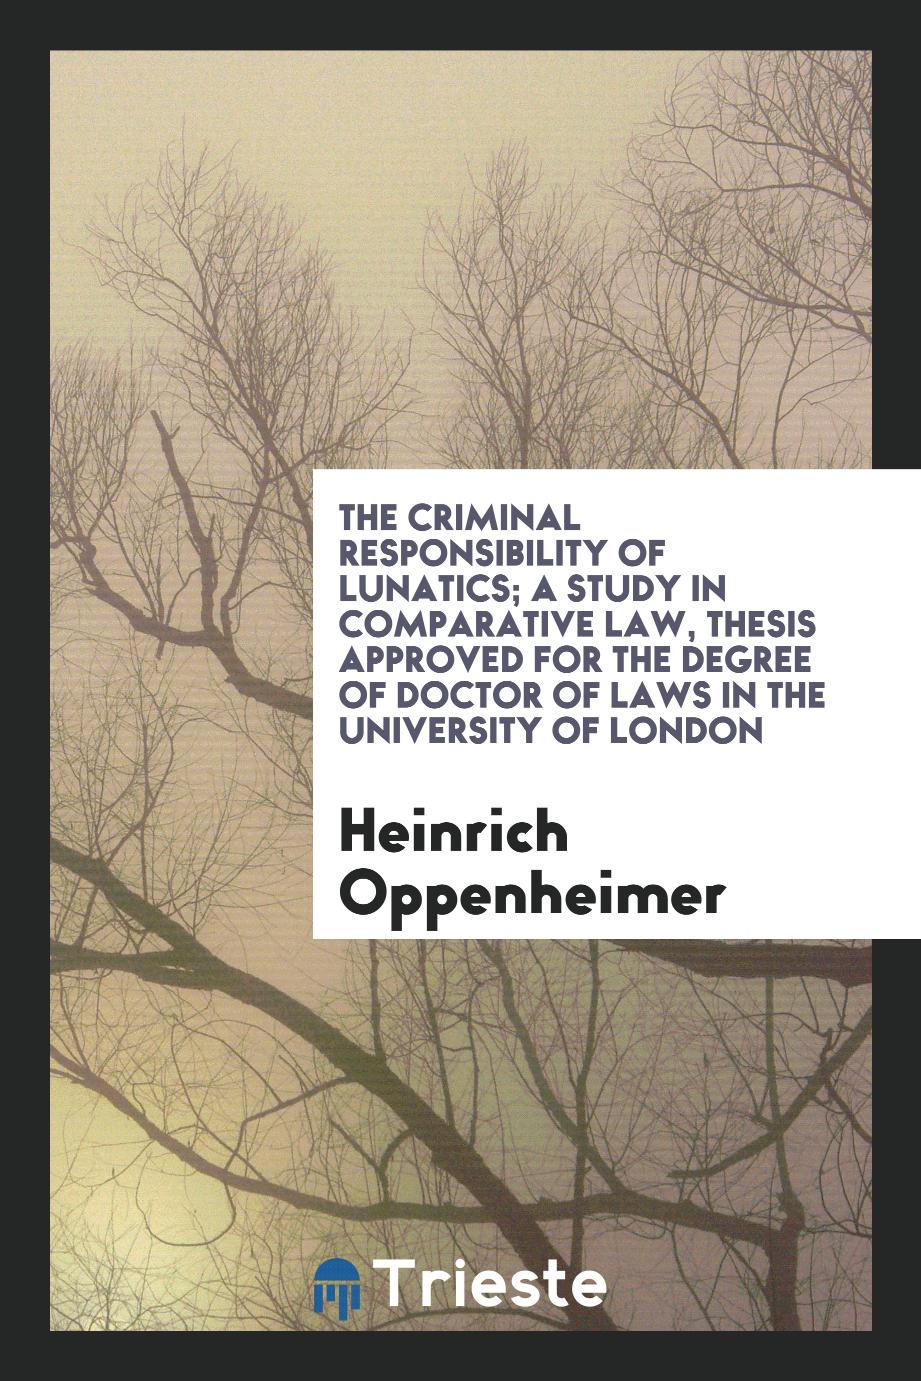 The criminal responsibility of lunatics; a study in comparative law, thesis approved for the degree of doctor of laws in the University of London